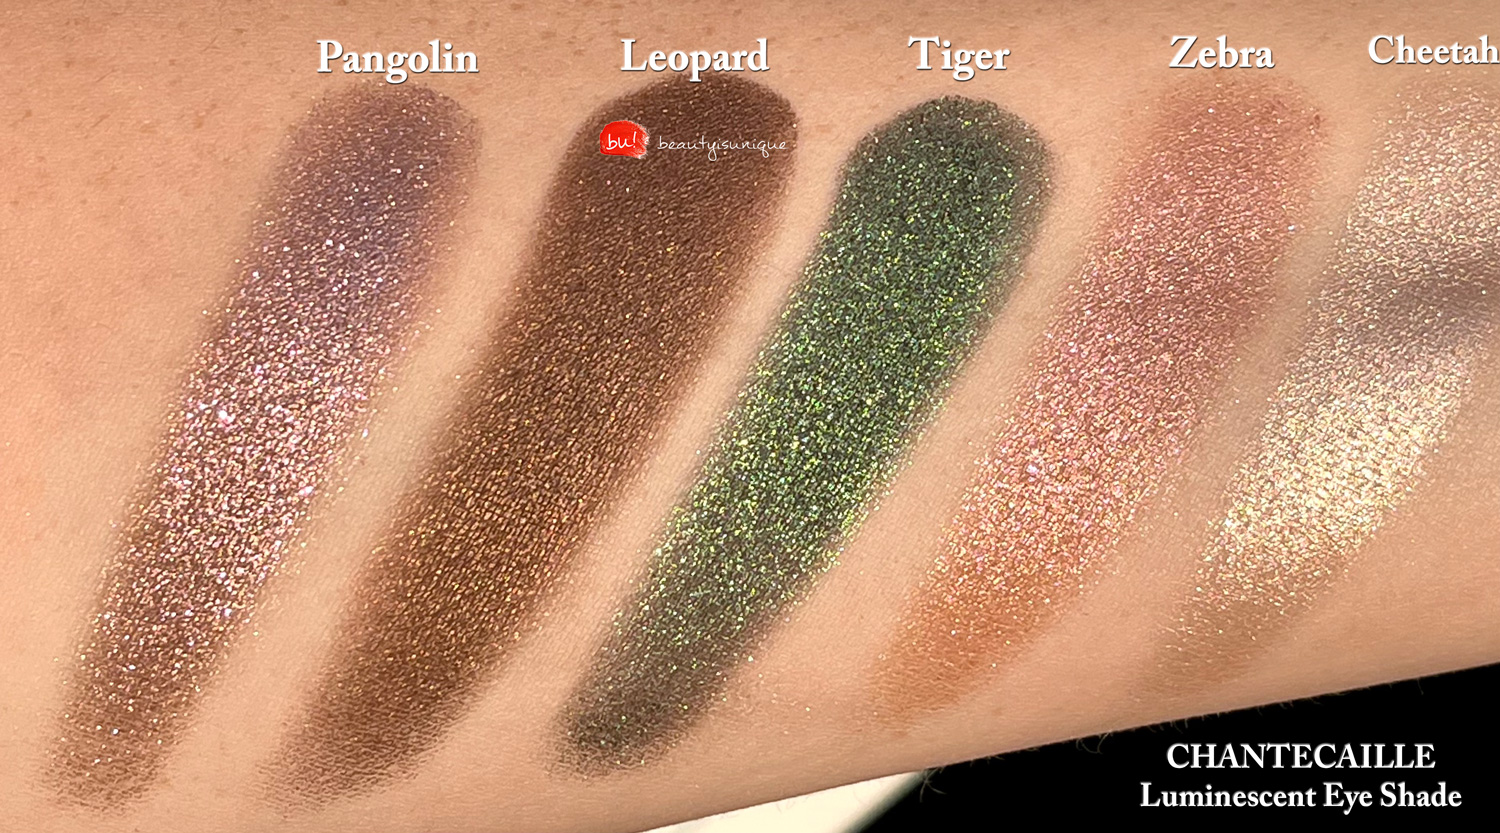 chantecaille-luminescent-eye-shade-tiger-regal-emerald-swatches